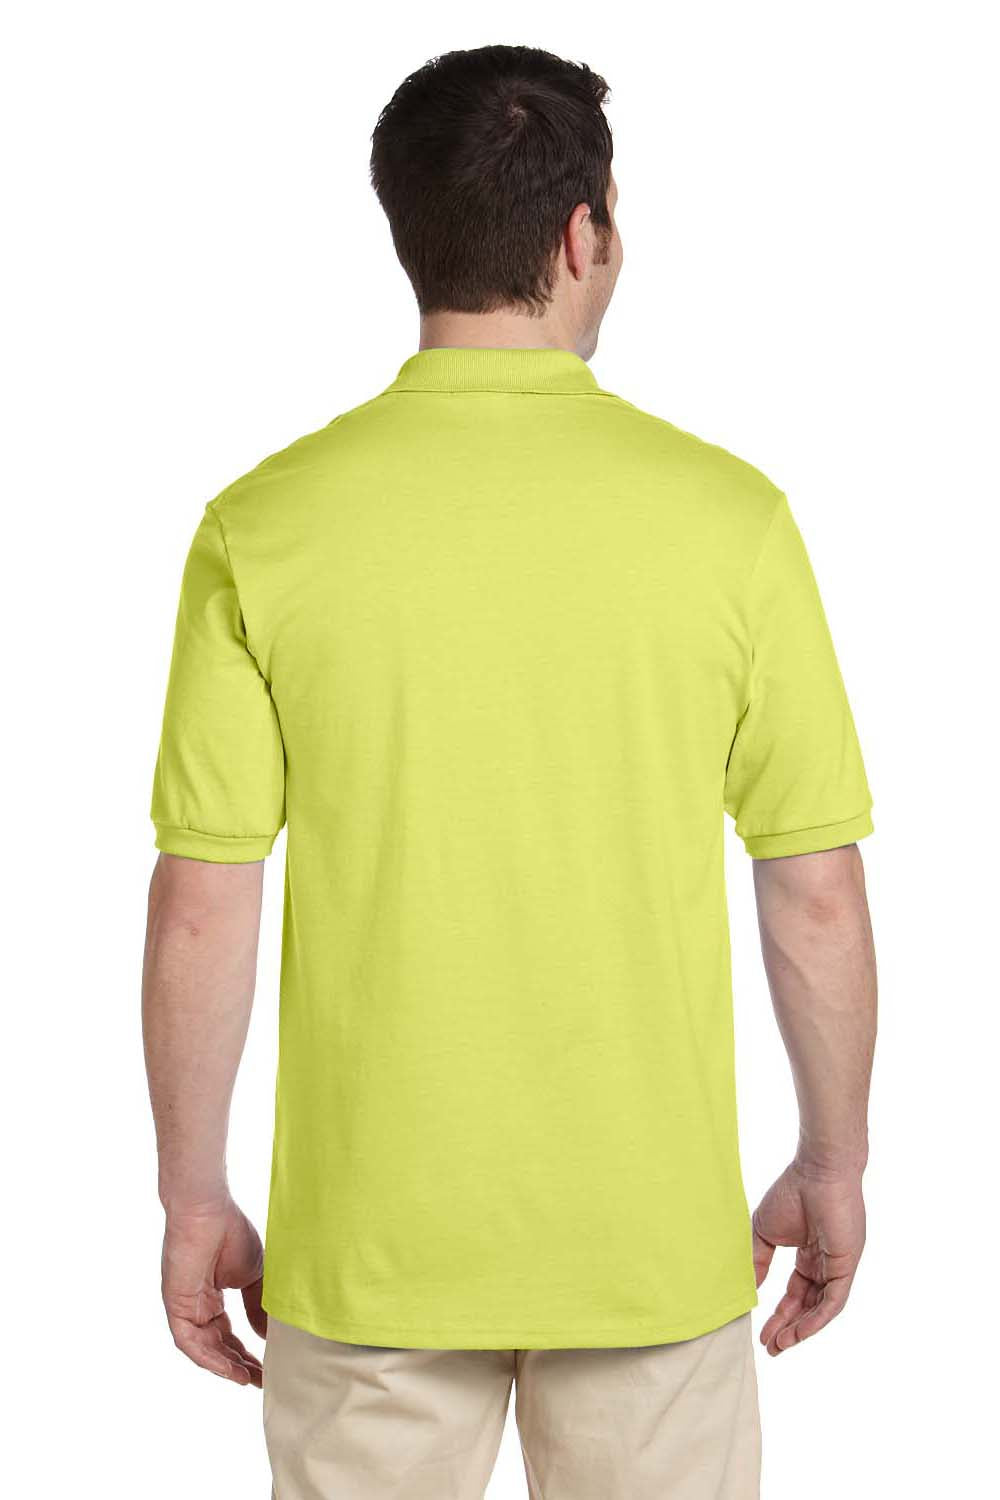 Jerzees 437 Mens SpotShield Stain Resistant Short Sleeve Polo Shirt Safety Green Back